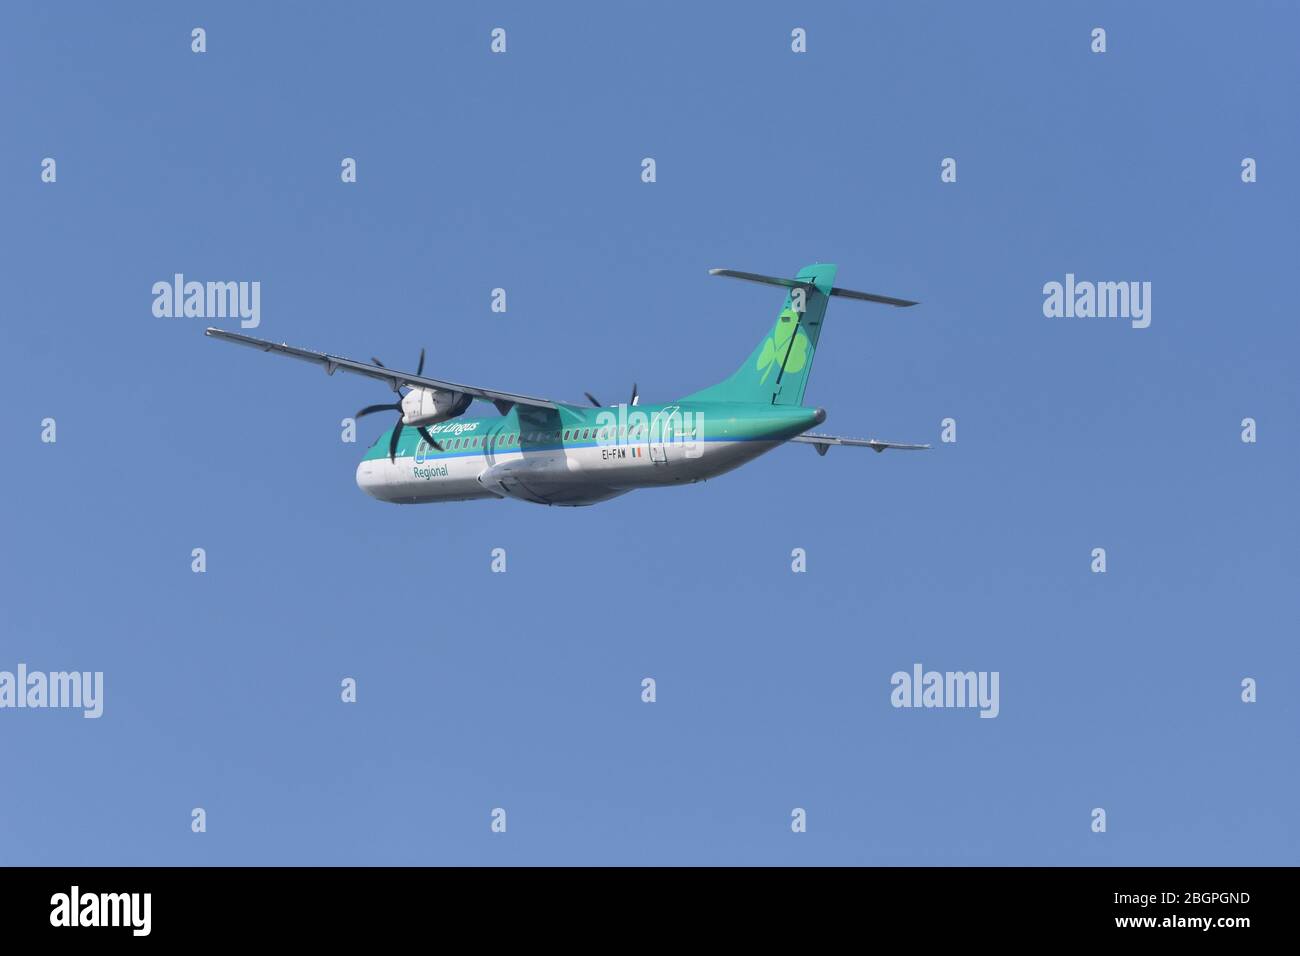 A small Aer Lingus regional airline propeller plane at Bristol International Airport Stock Photo